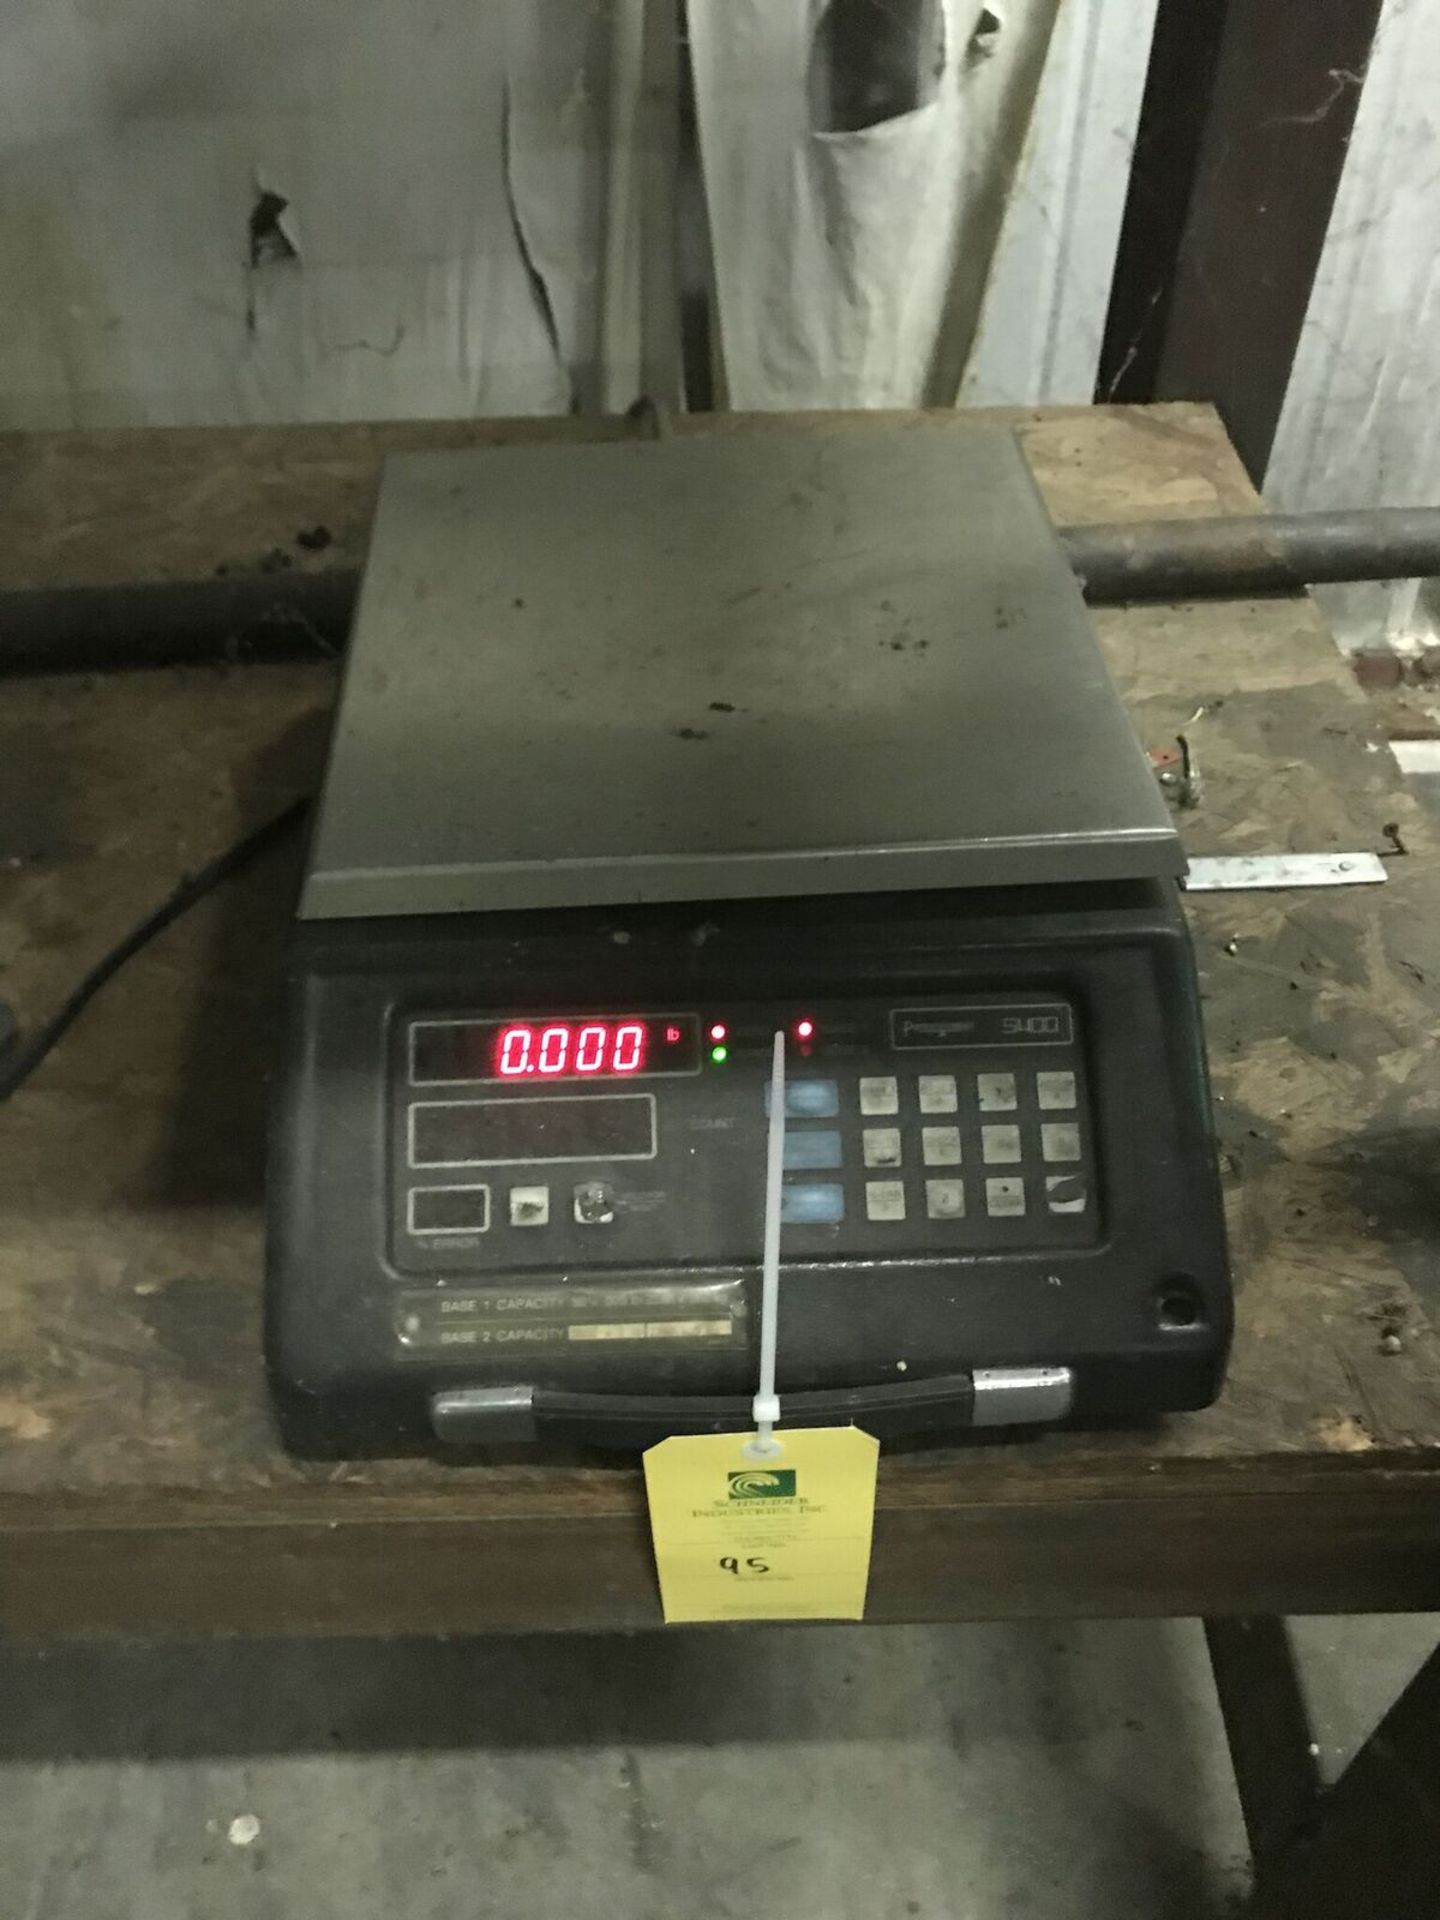 Pennslyvania 5000 Industrial Counting Scale with 4' x 4' Weighing Platform